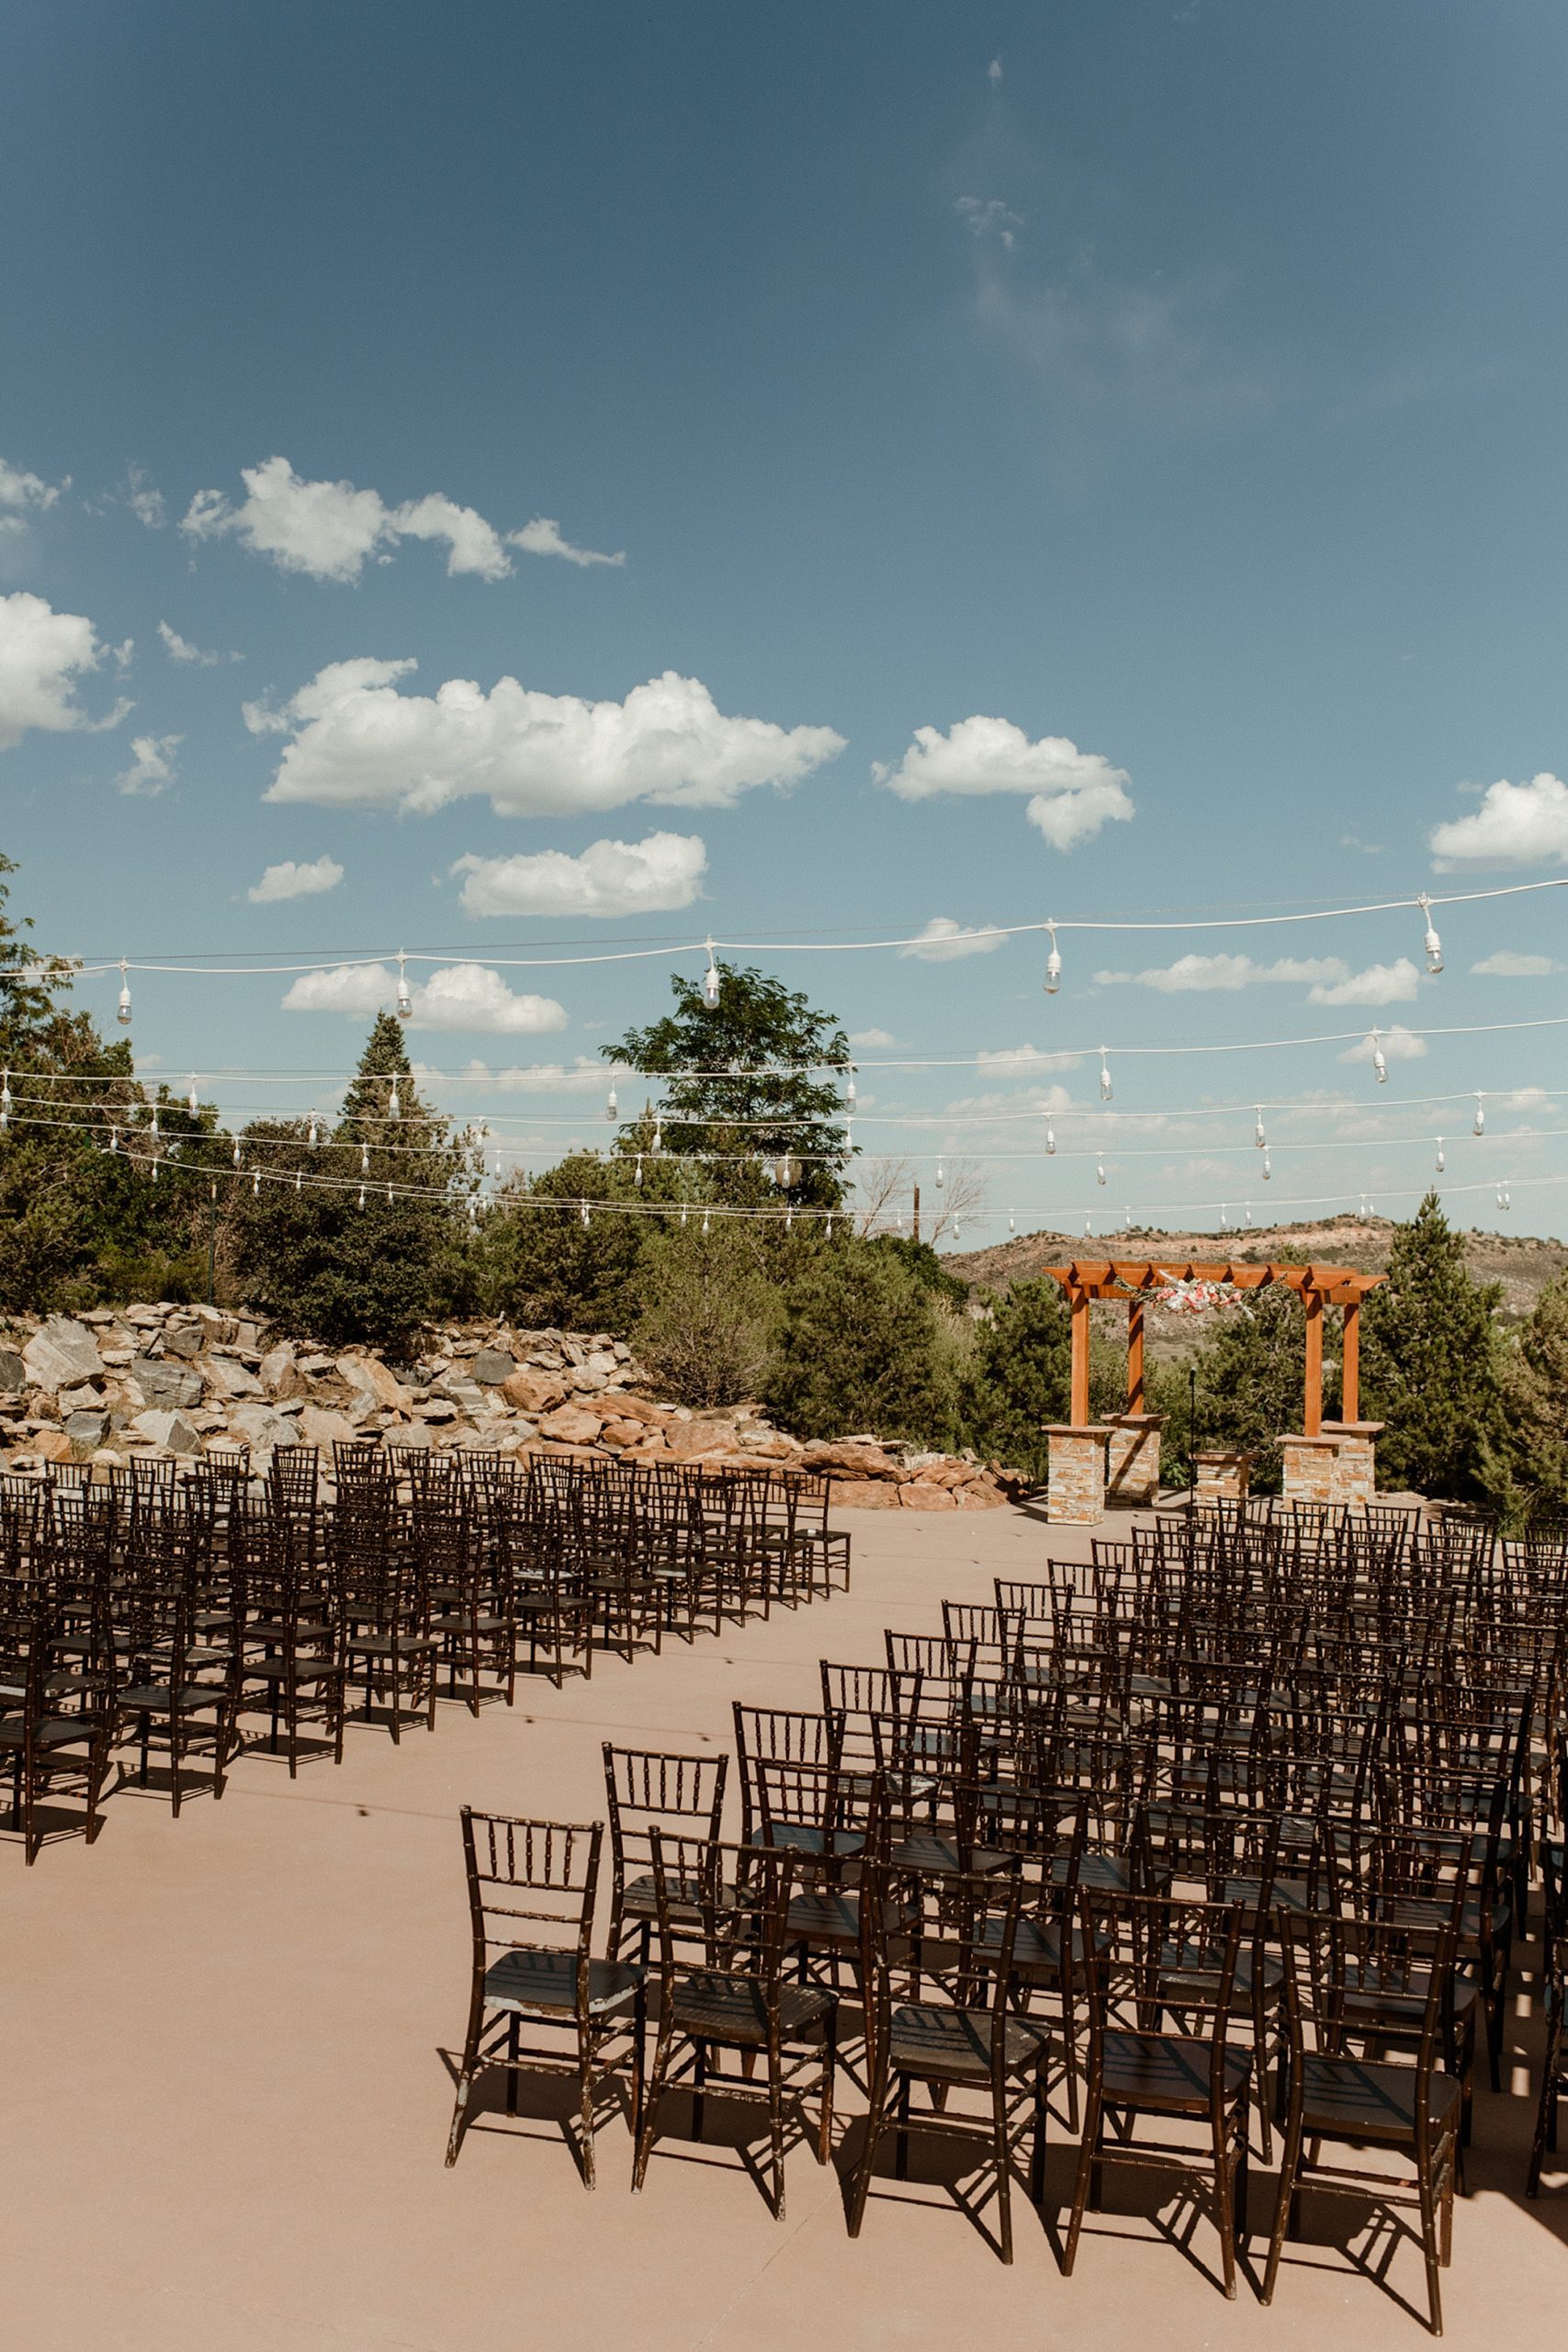 The ceremony space at Willow Ridge Manor wedding venue in Morrison, CO